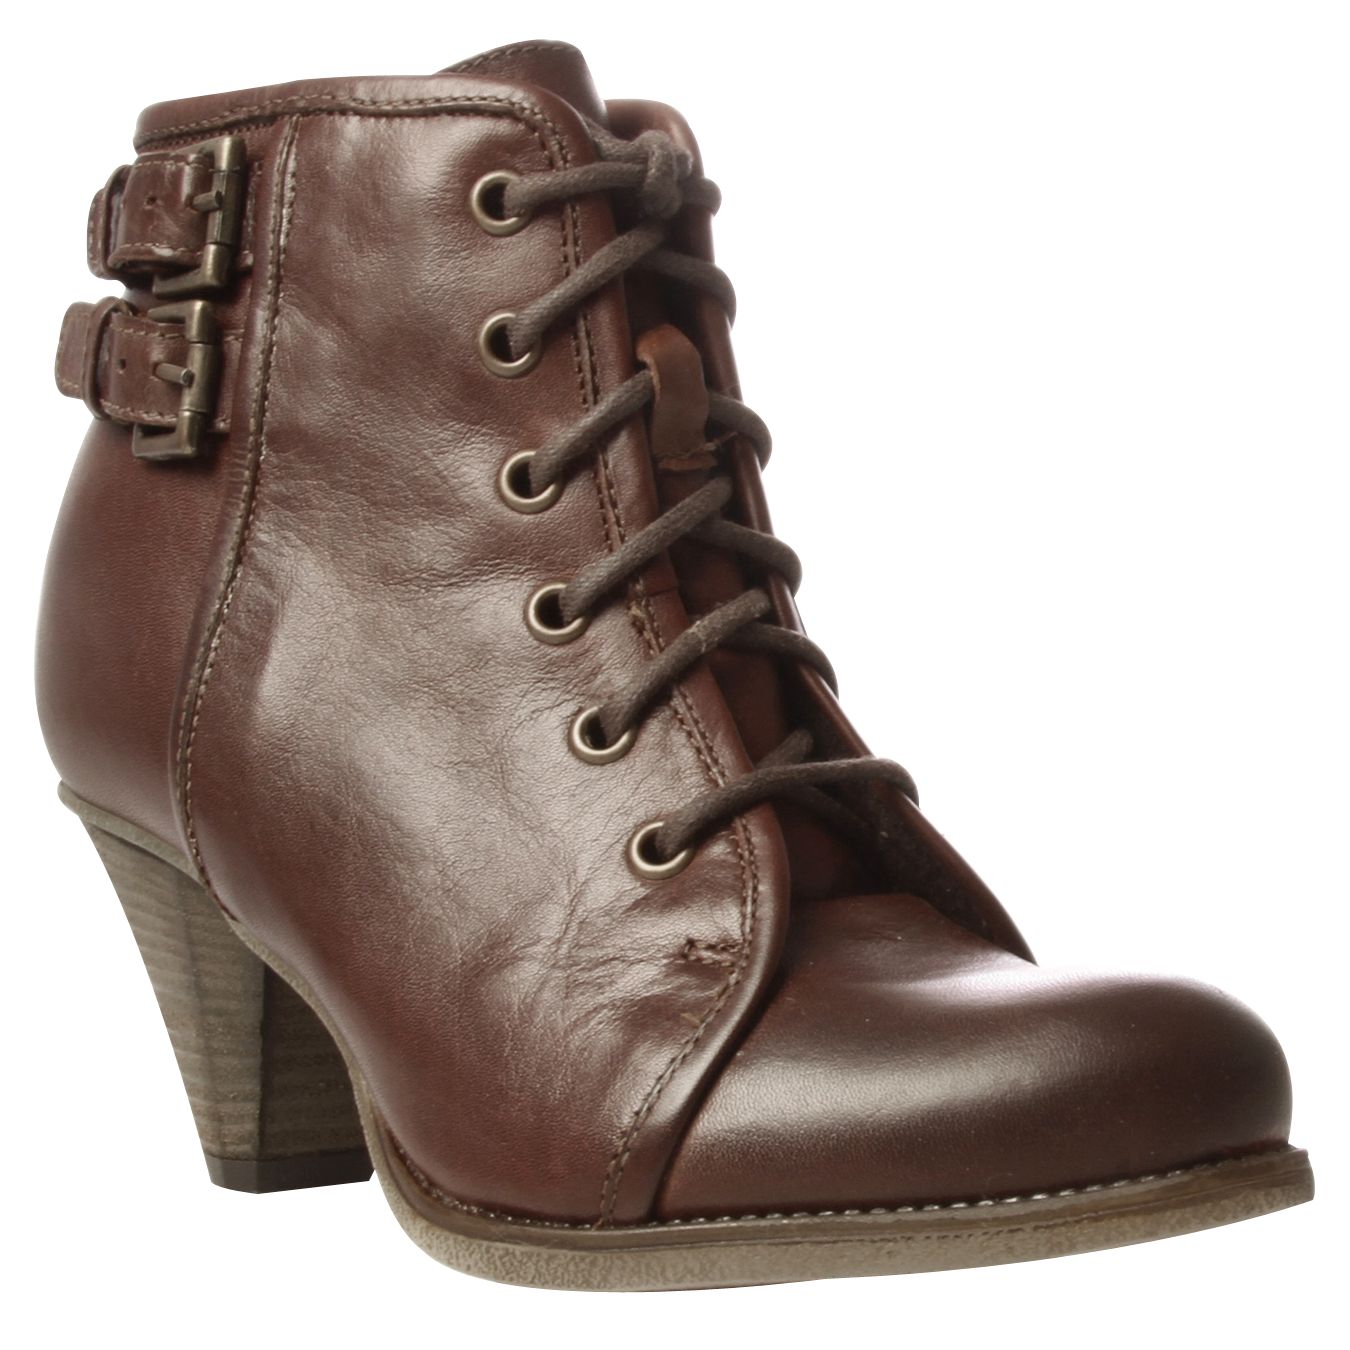 lace up boots for women. A casual soft leather lace up